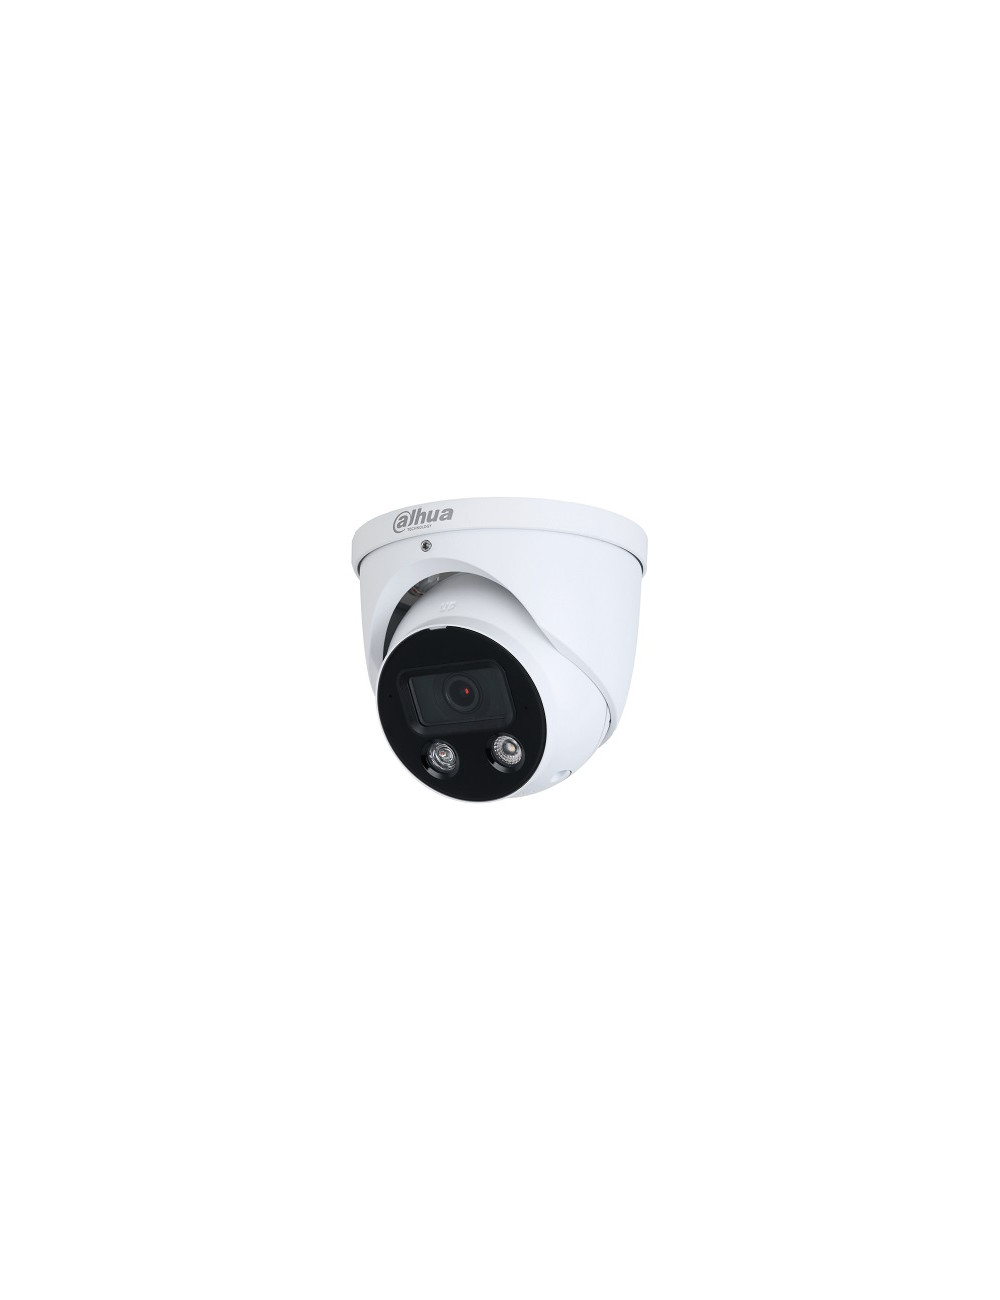 4K IP Network Camera 8MP HDW3849H-AS-PV-S4 2.8mm